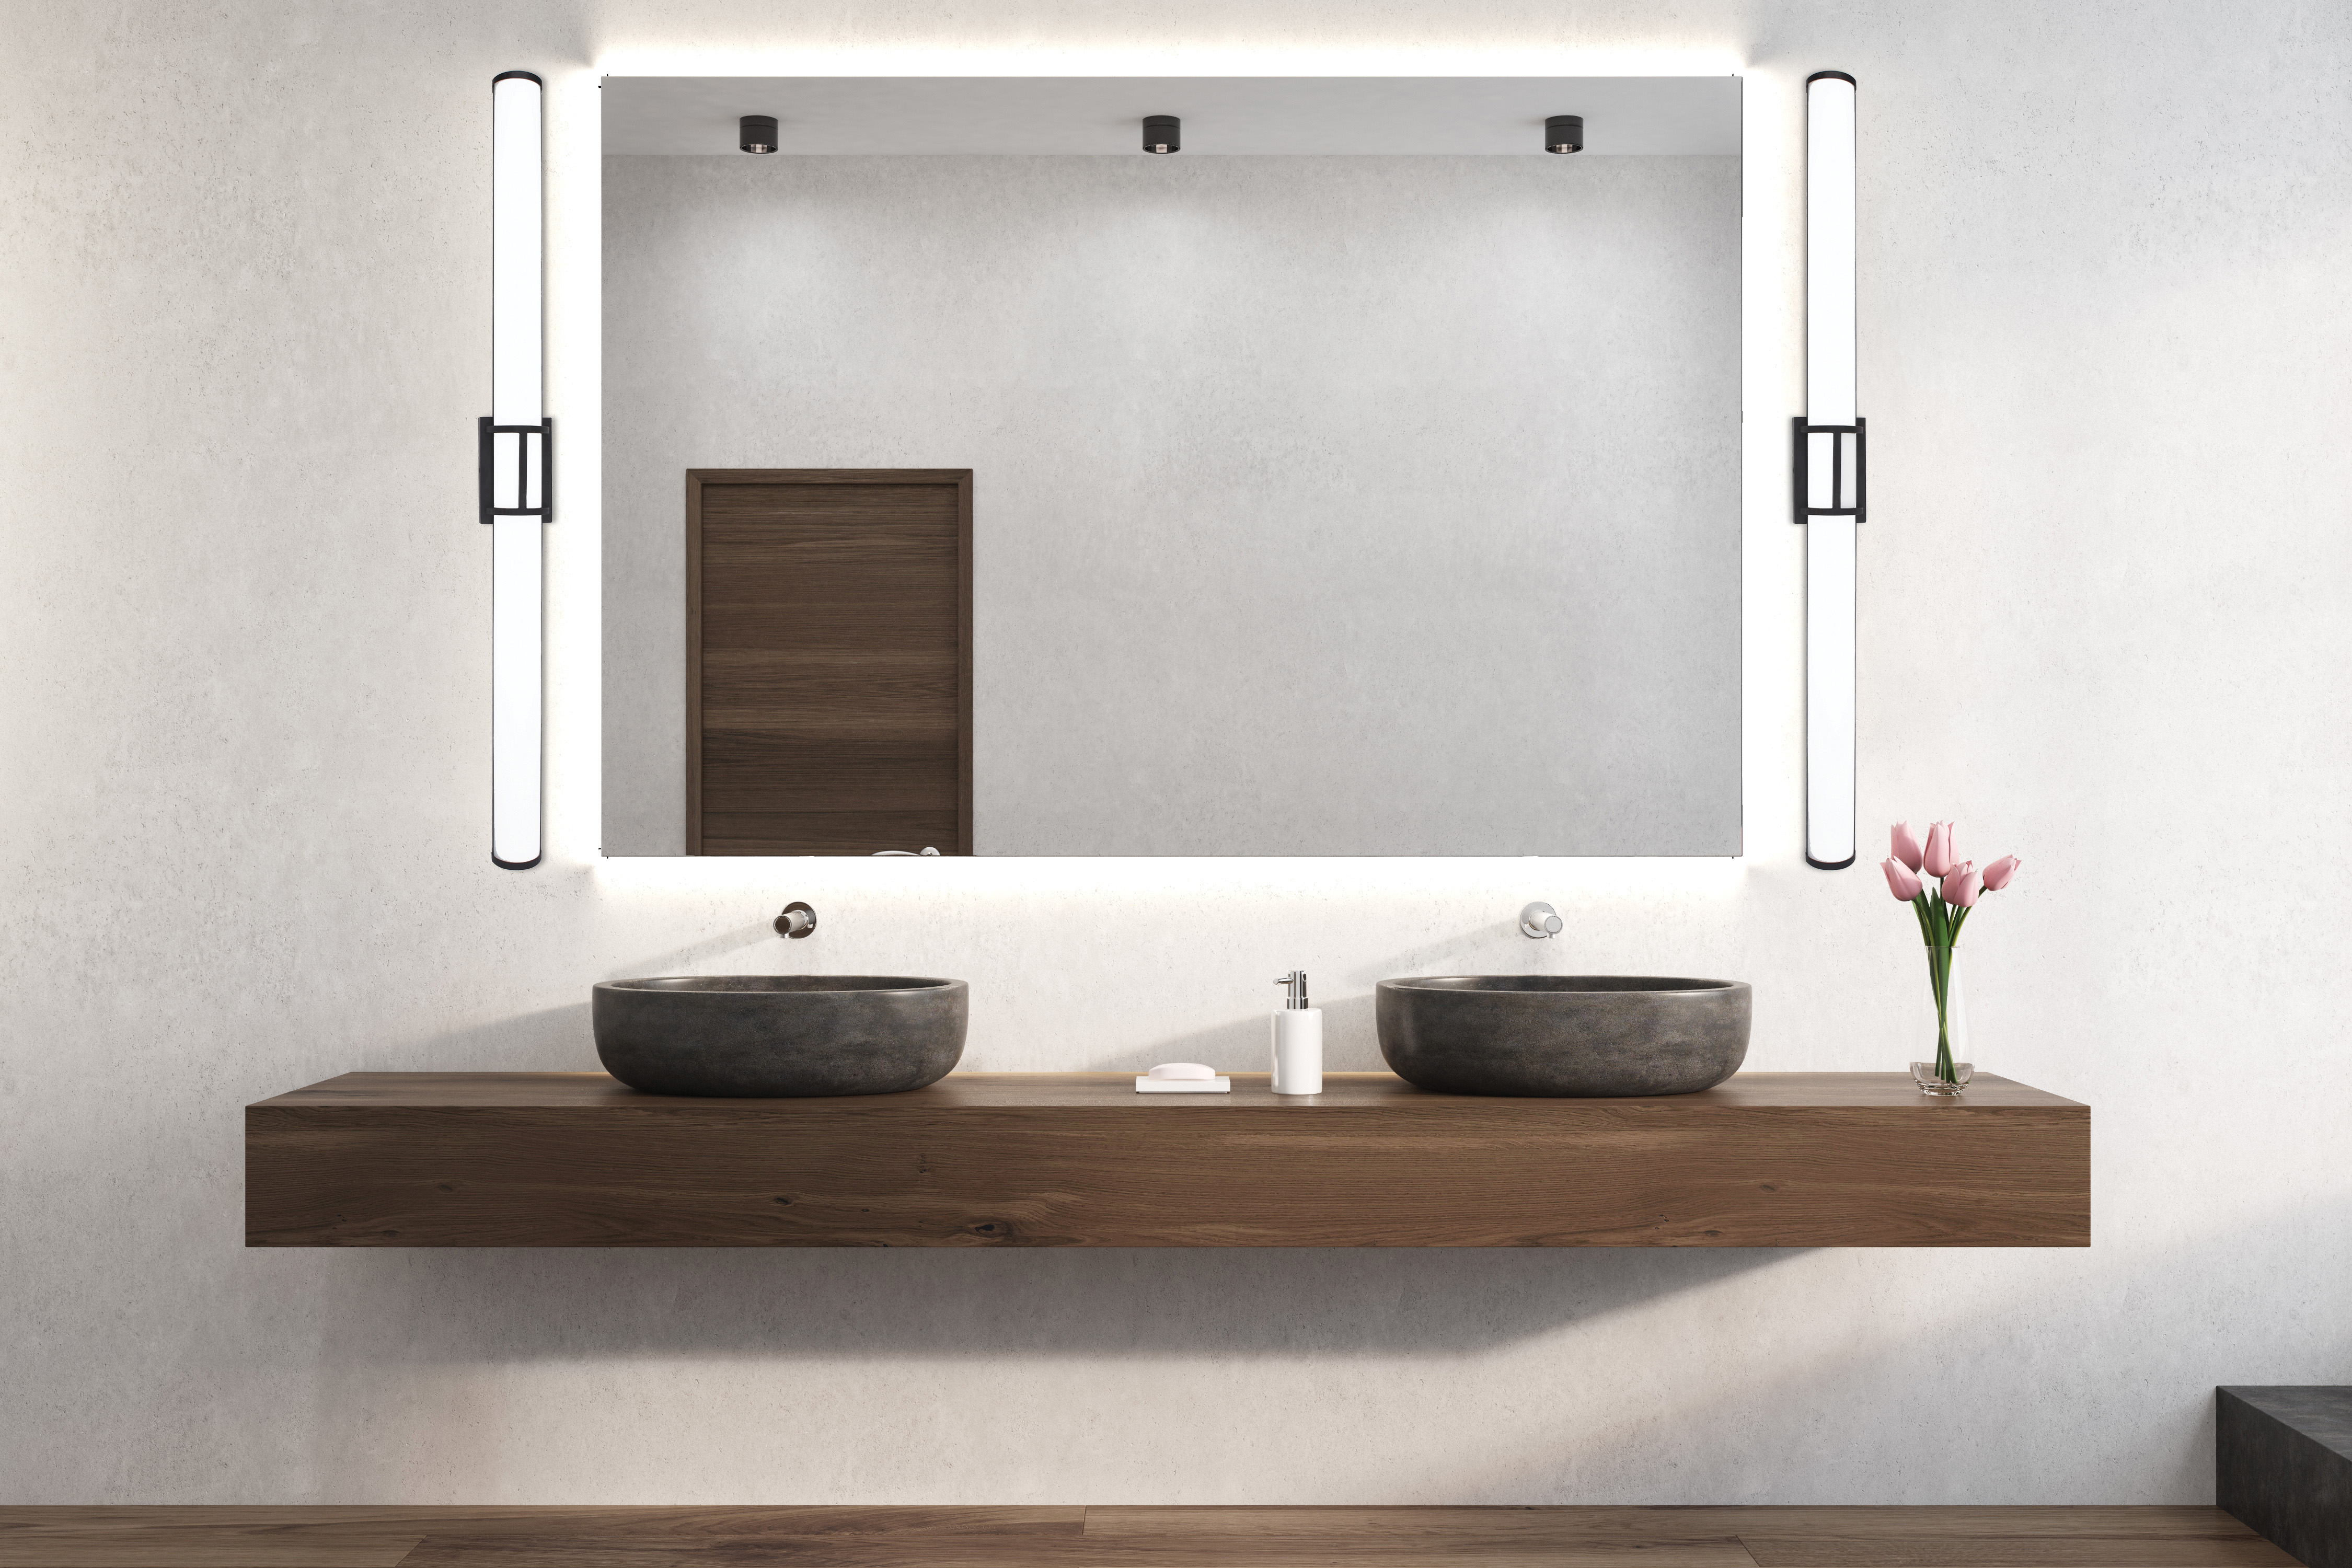 Modern wall sconce RAMARO Eglo 204135A in the bathroom with wooden vanity